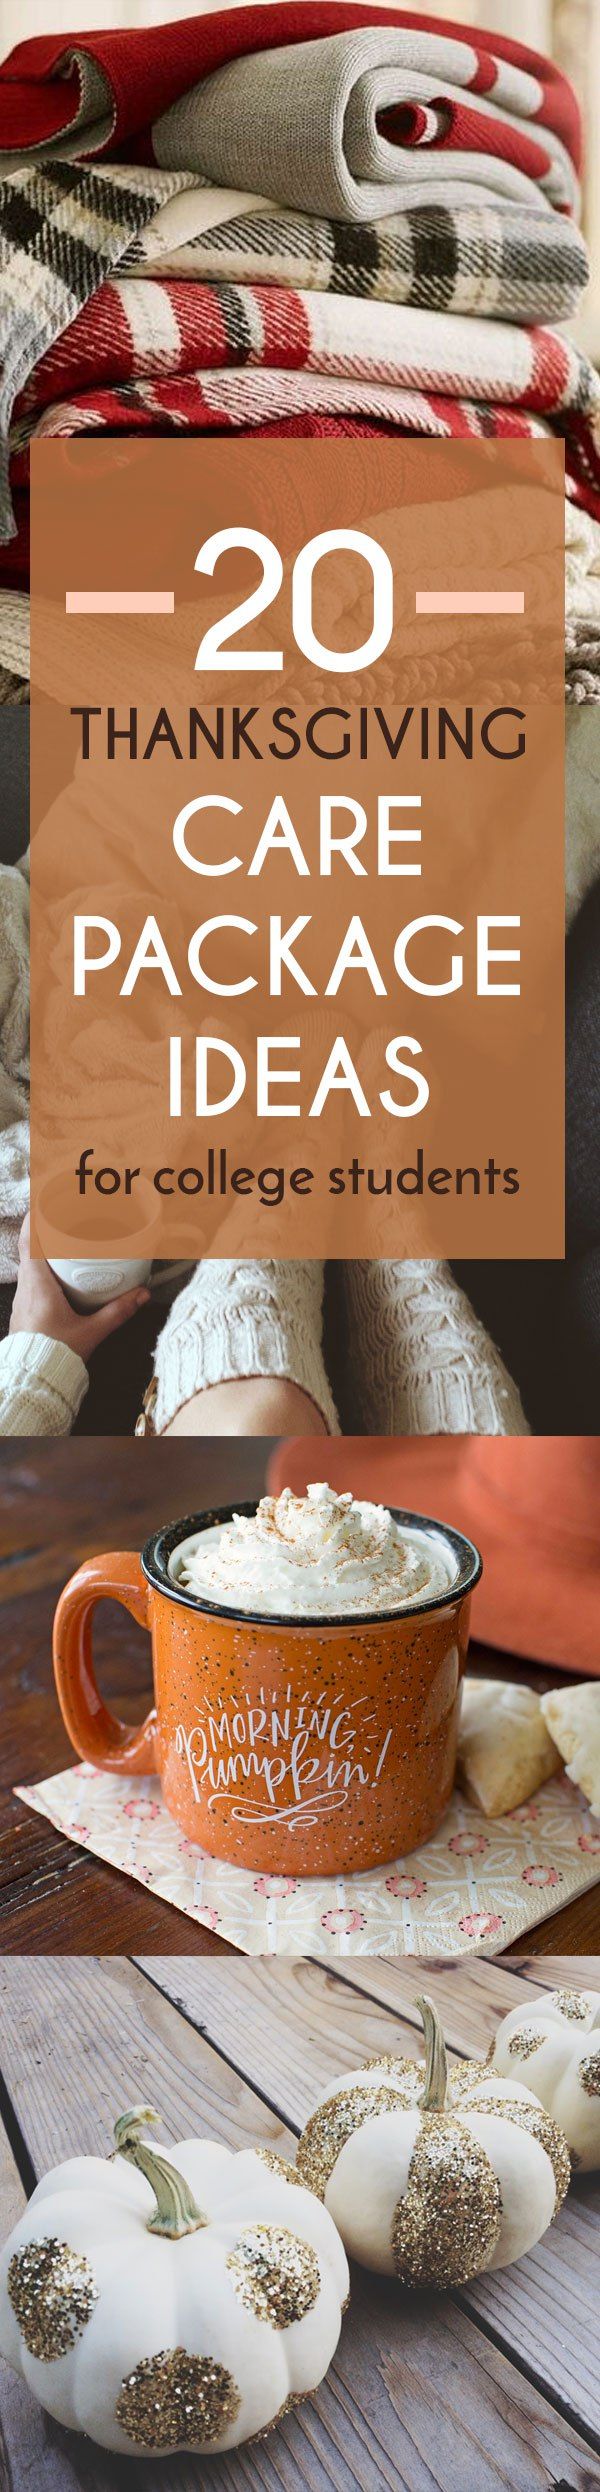 20 Festive Thanksgiving Care Package Ideas For College Students - Society19